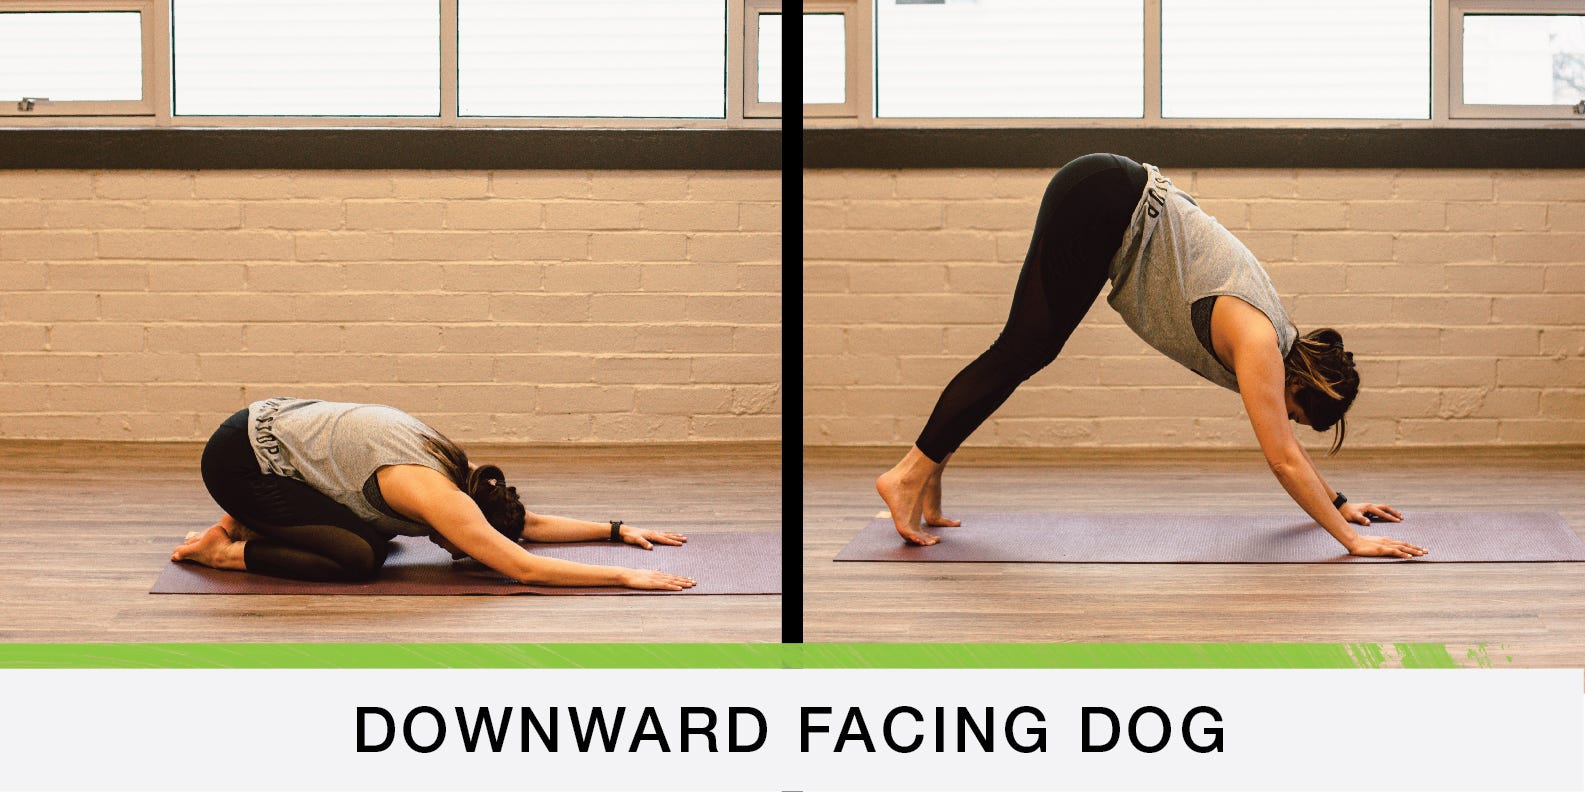 10-minute yoga: Wind down post run with this eight-pose flow